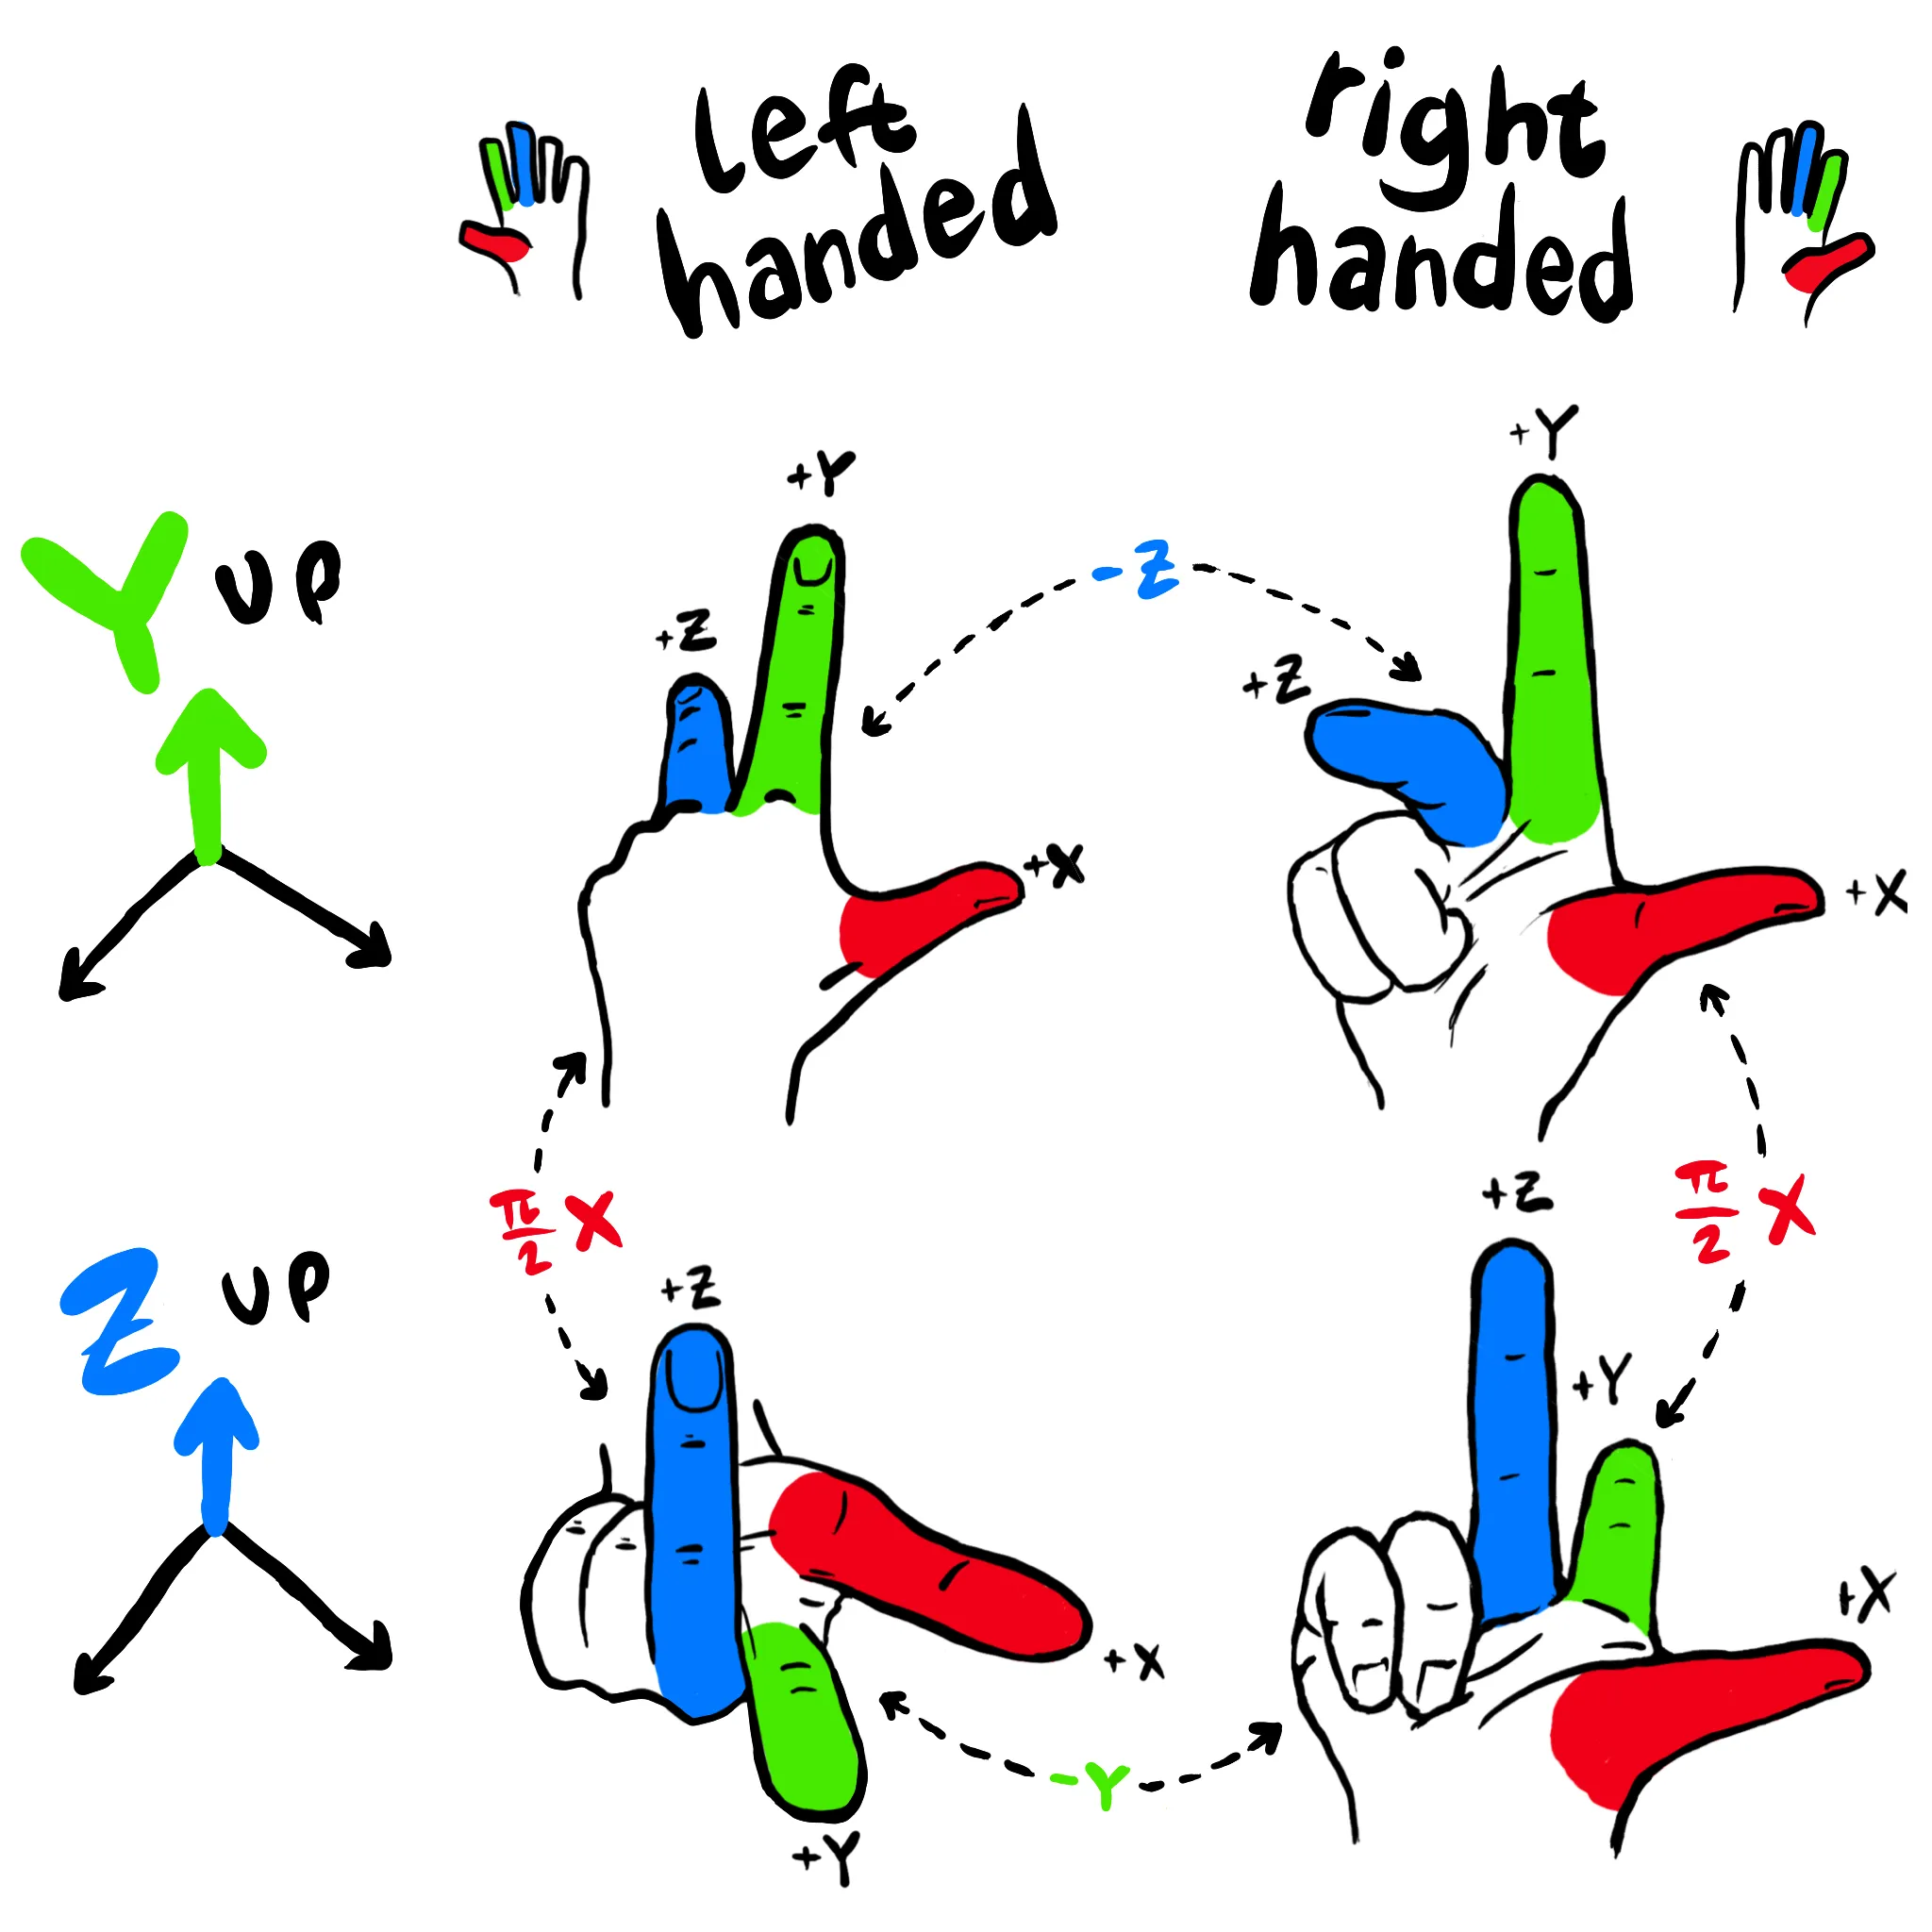 A diagram of Y-up, Z-up, left handed and right handed coordinate systems